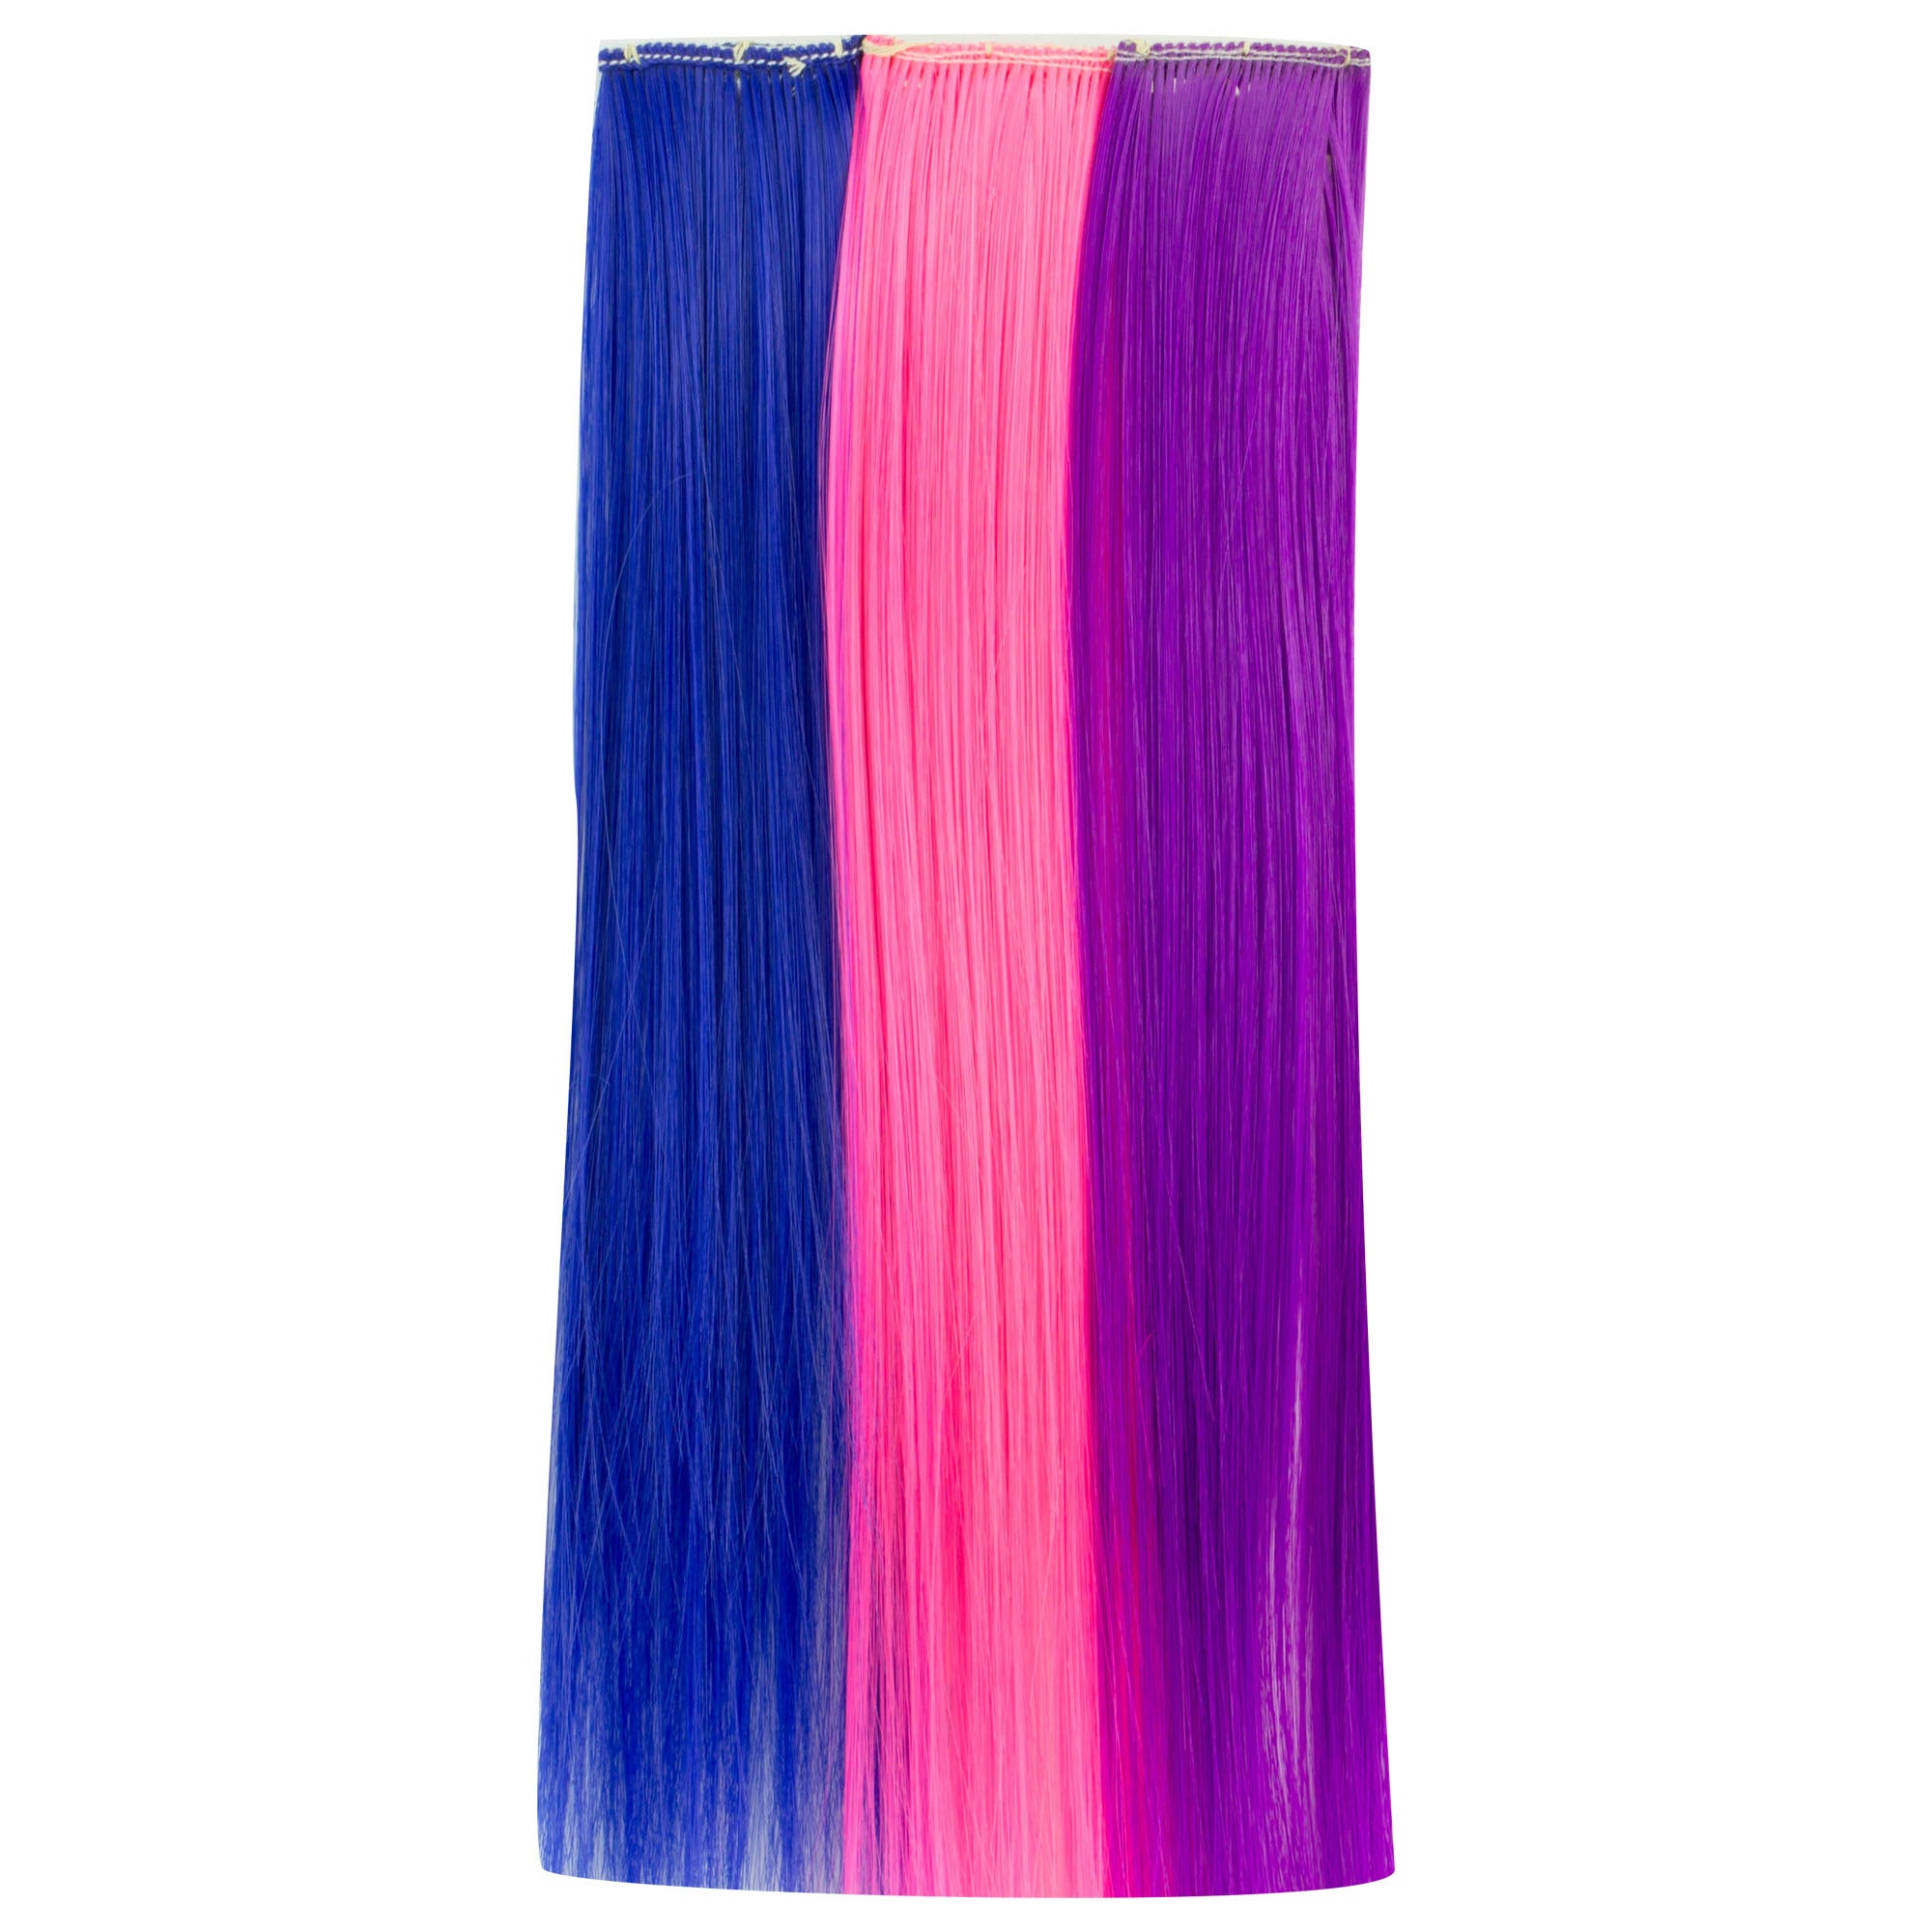 Sophia's - 18" Doll - Set of 3 Clip in Hair Pieces - Hot Pink